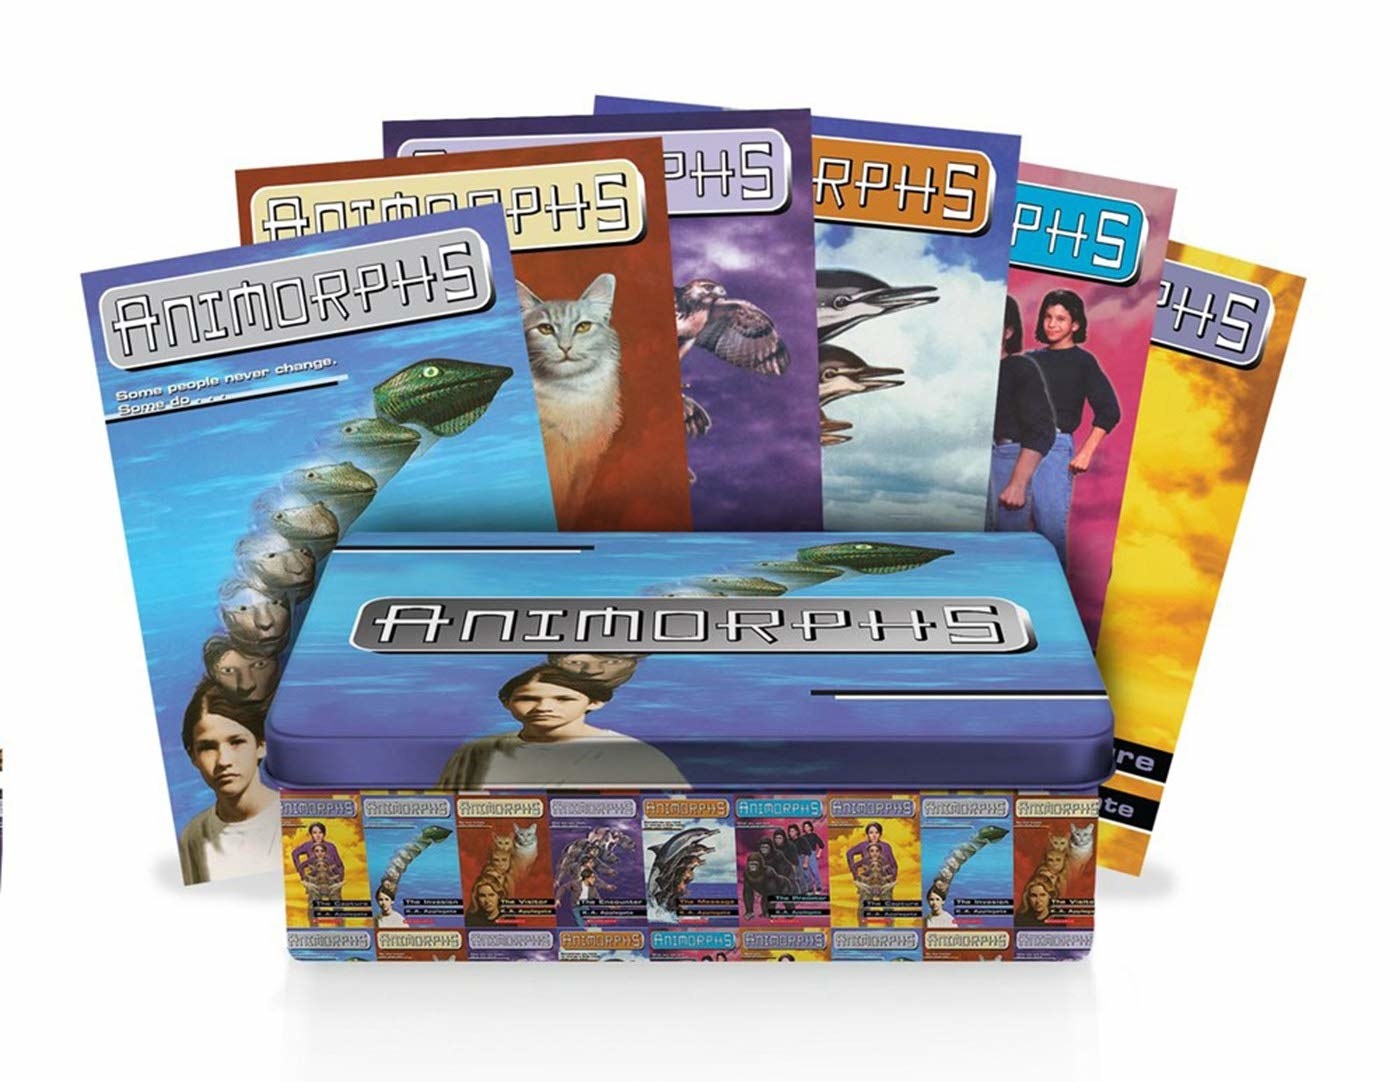 Tin set of Animorphs books, showing frog, cat, dolphin and other animals